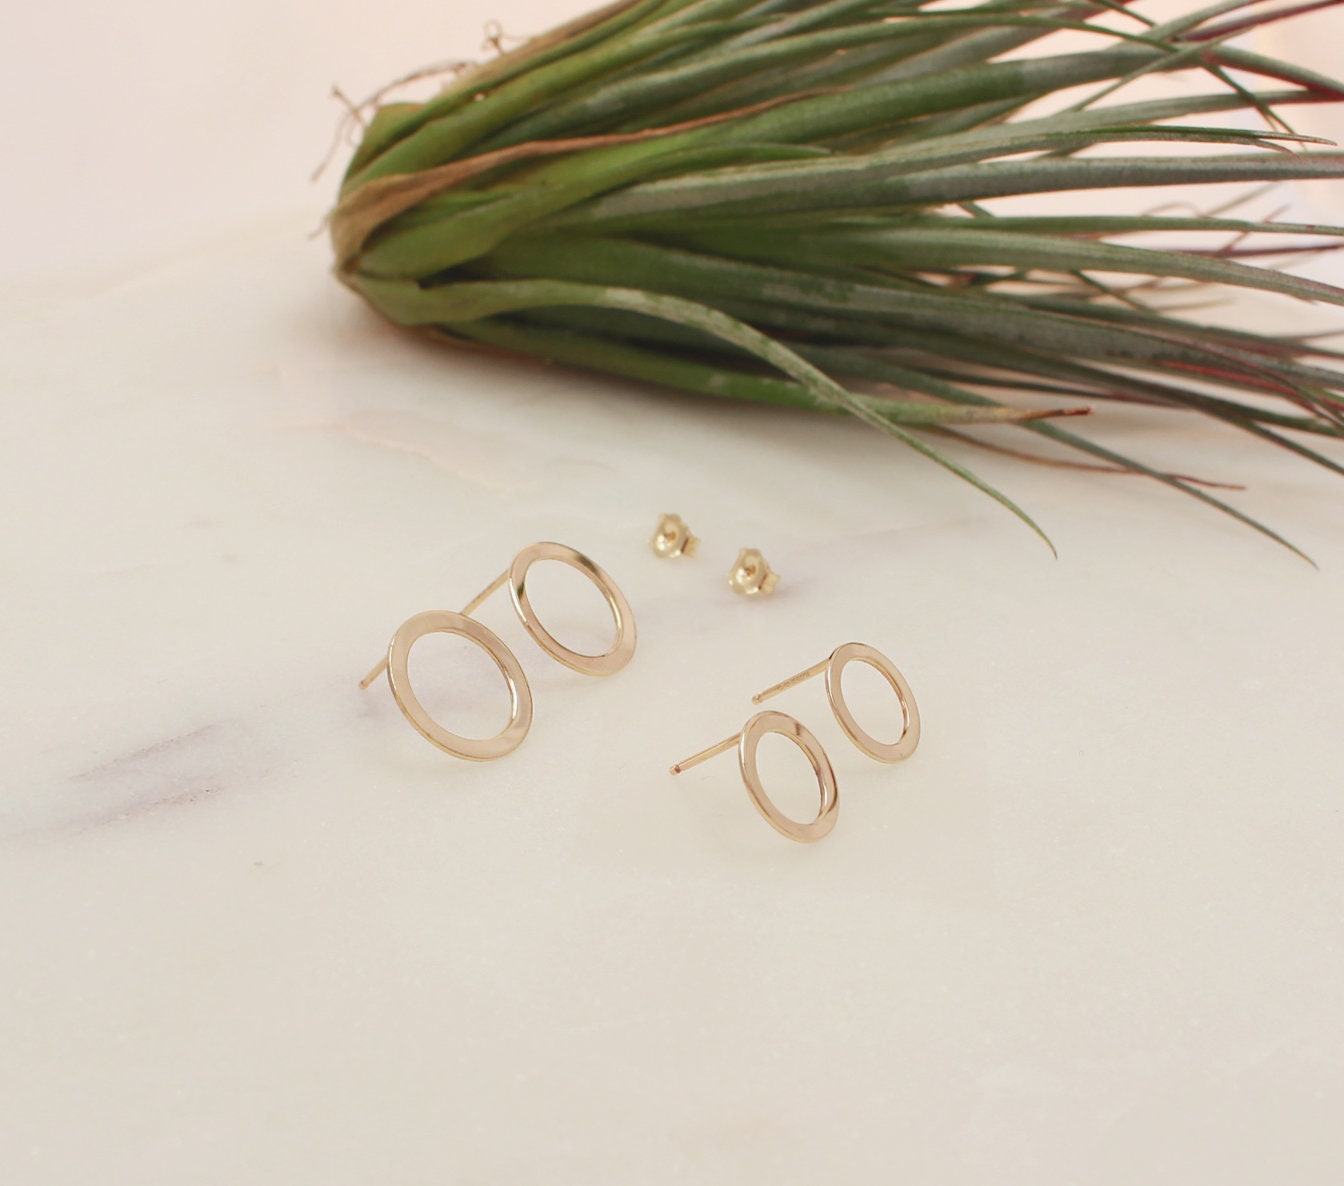 Gold Circle Stud Earrings -13mm(Large), 14K Gold Filled